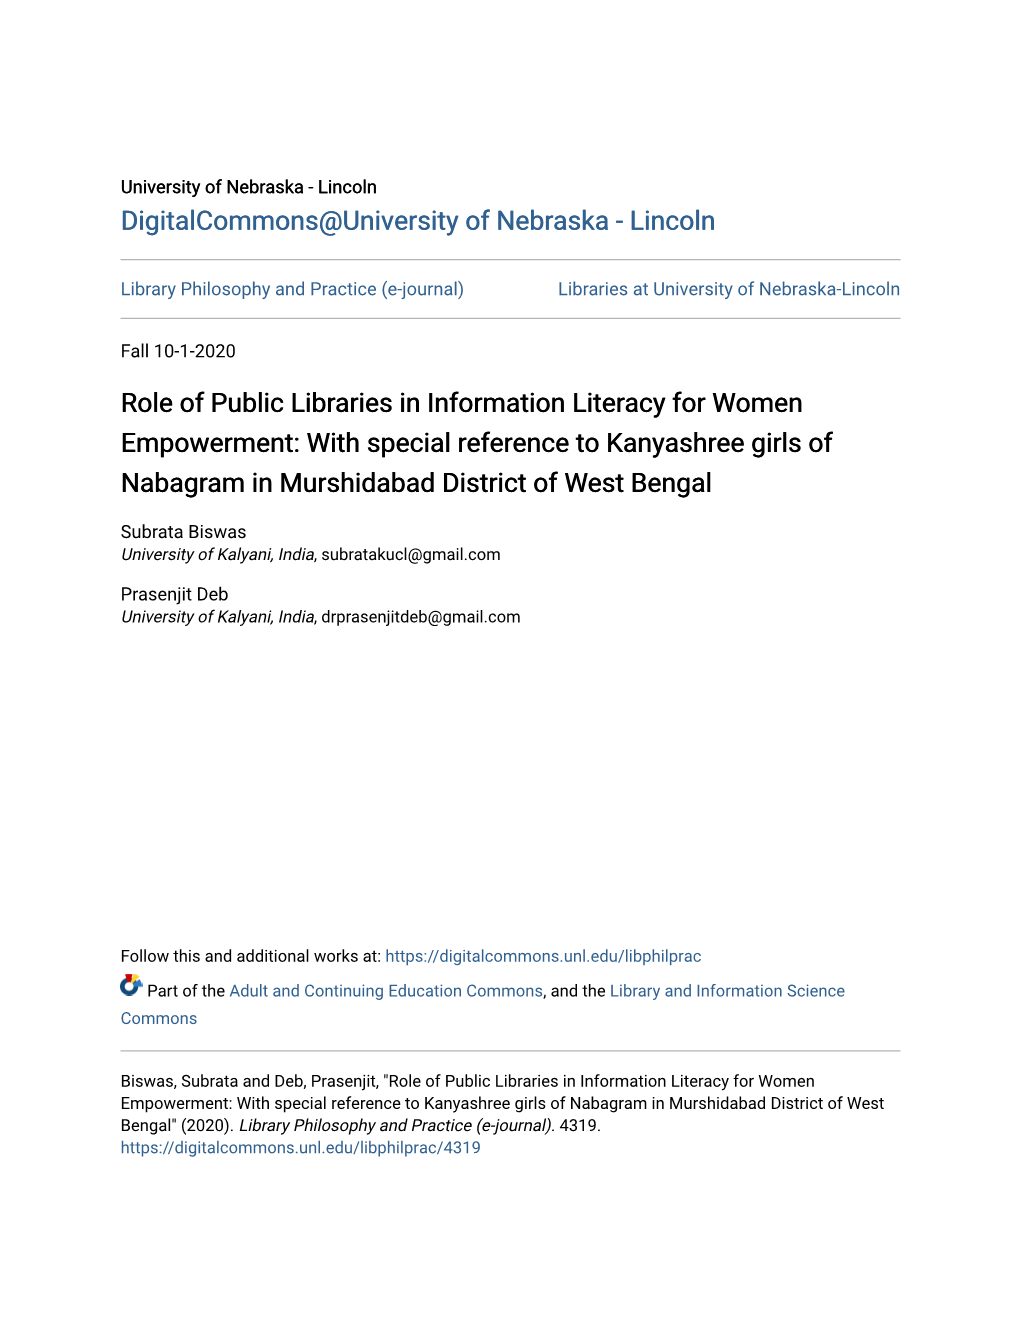 Role of Public Libraries in Information Literacy for Women Empowerment: with Special Reference to Kanyashree Girls of Nabagram in Murshidabad District of West Bengal